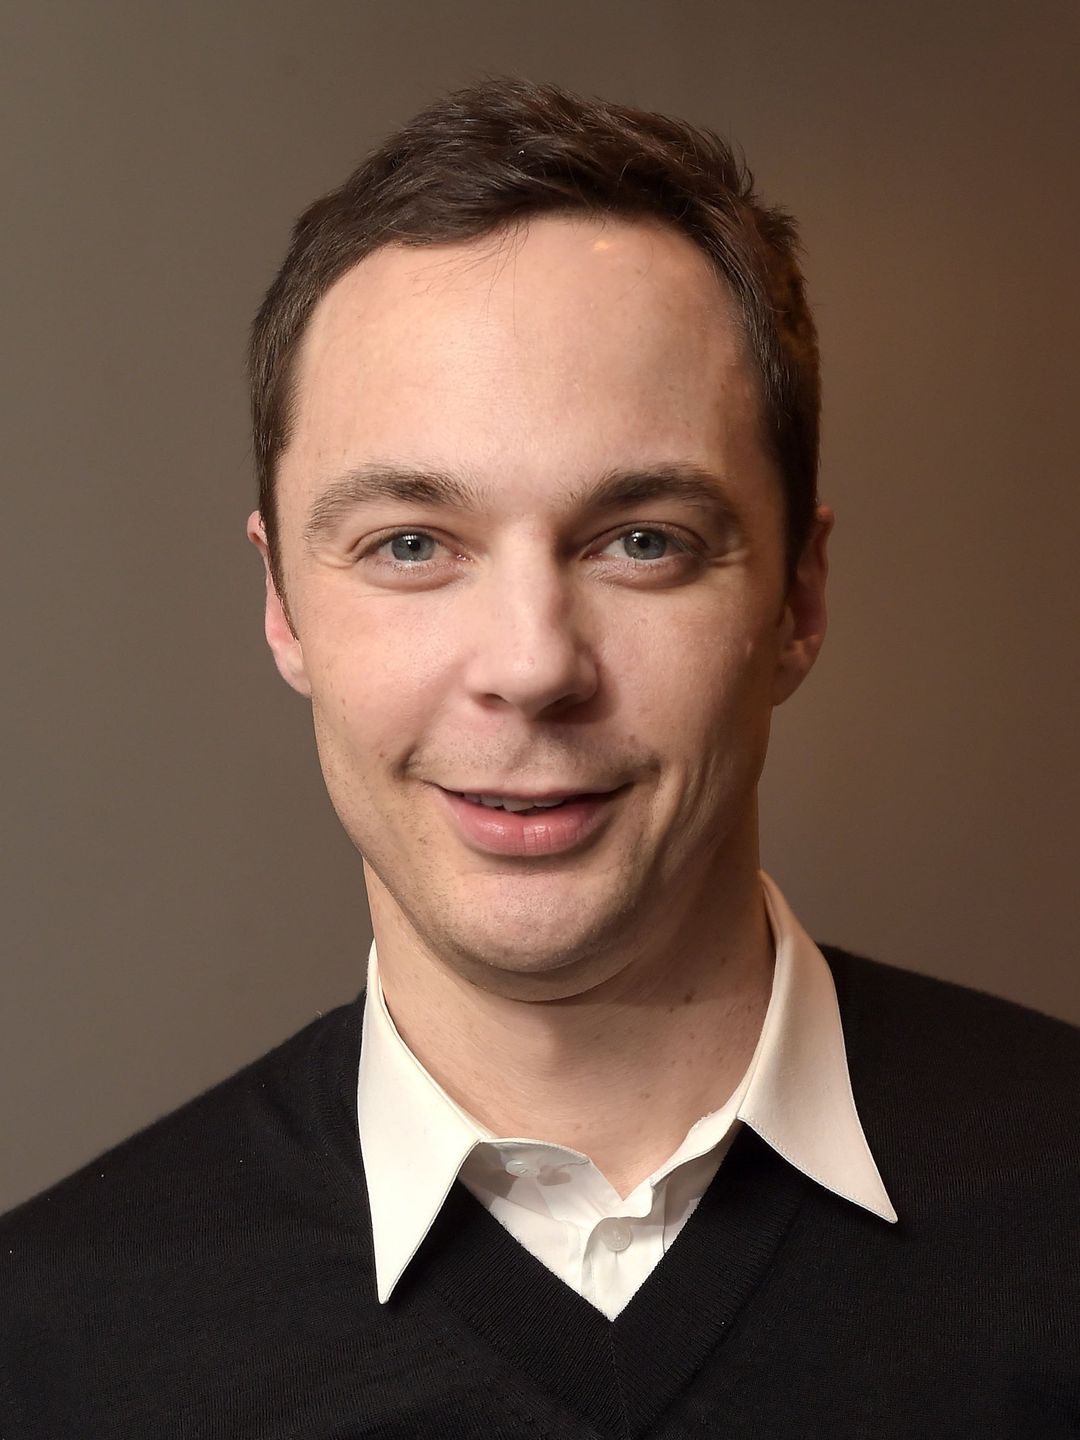 Jim Parsons young age